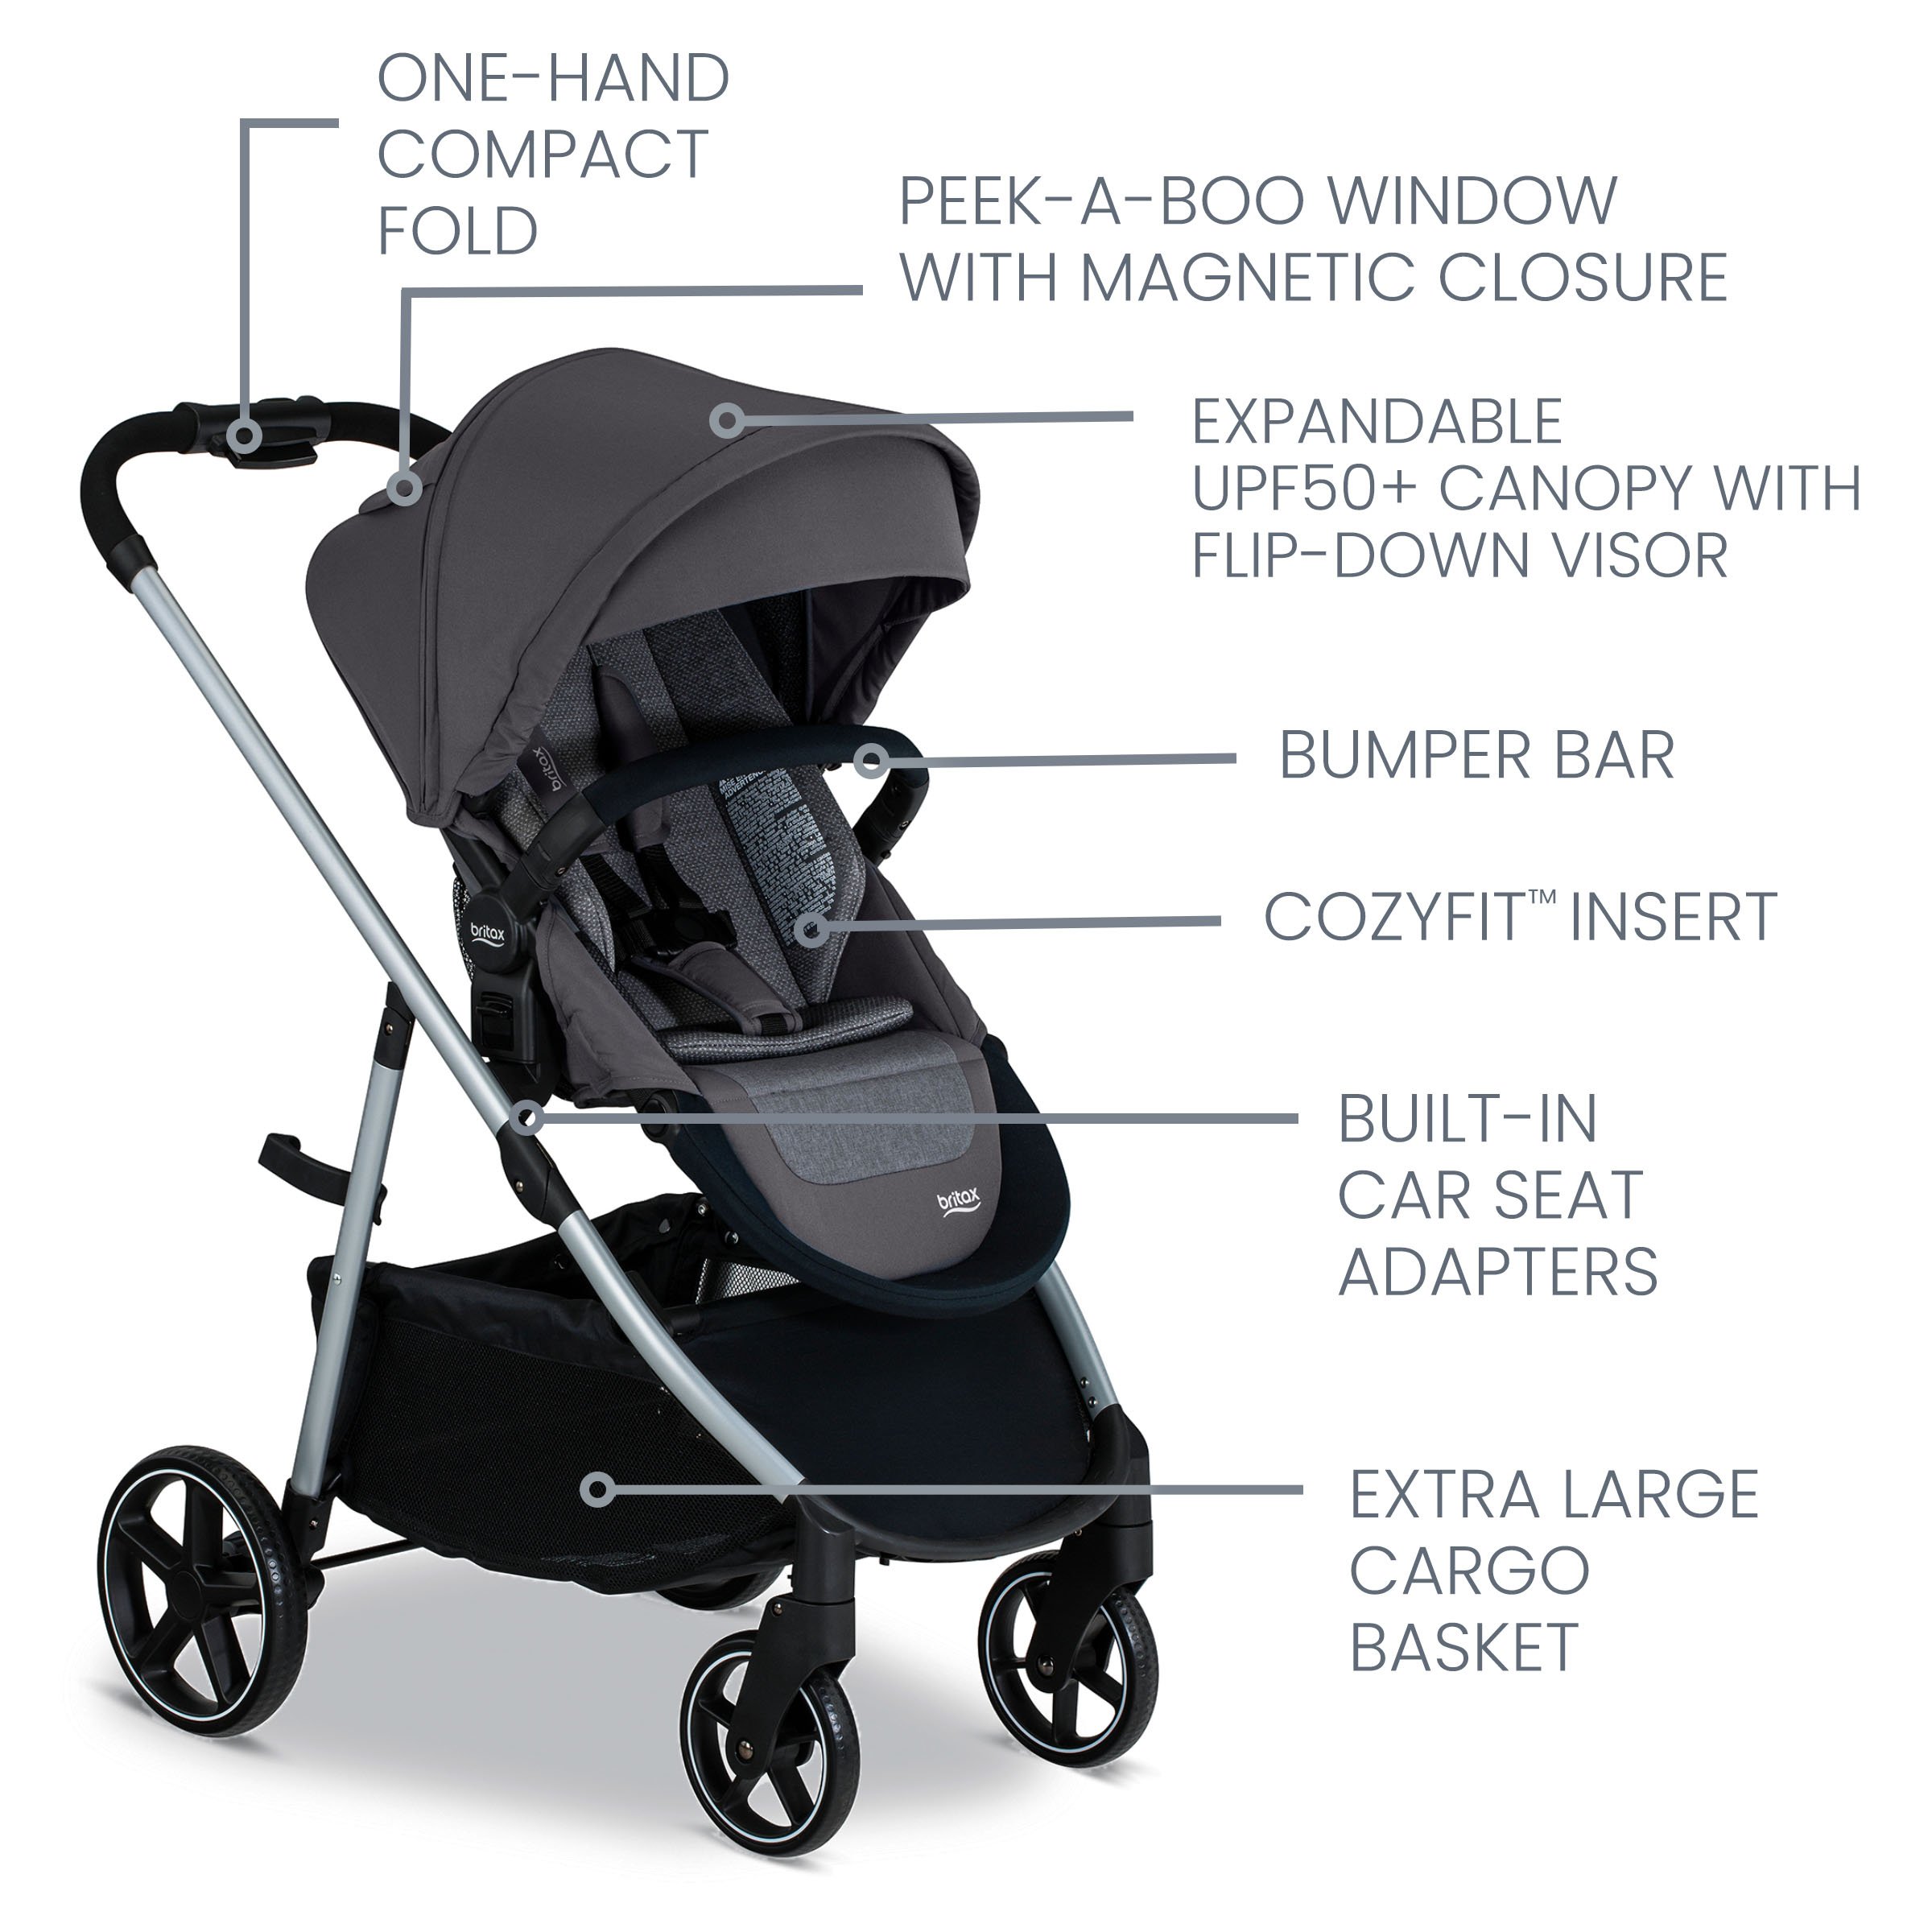 Grove Stroller Features labeled on Pindot Stone fashion